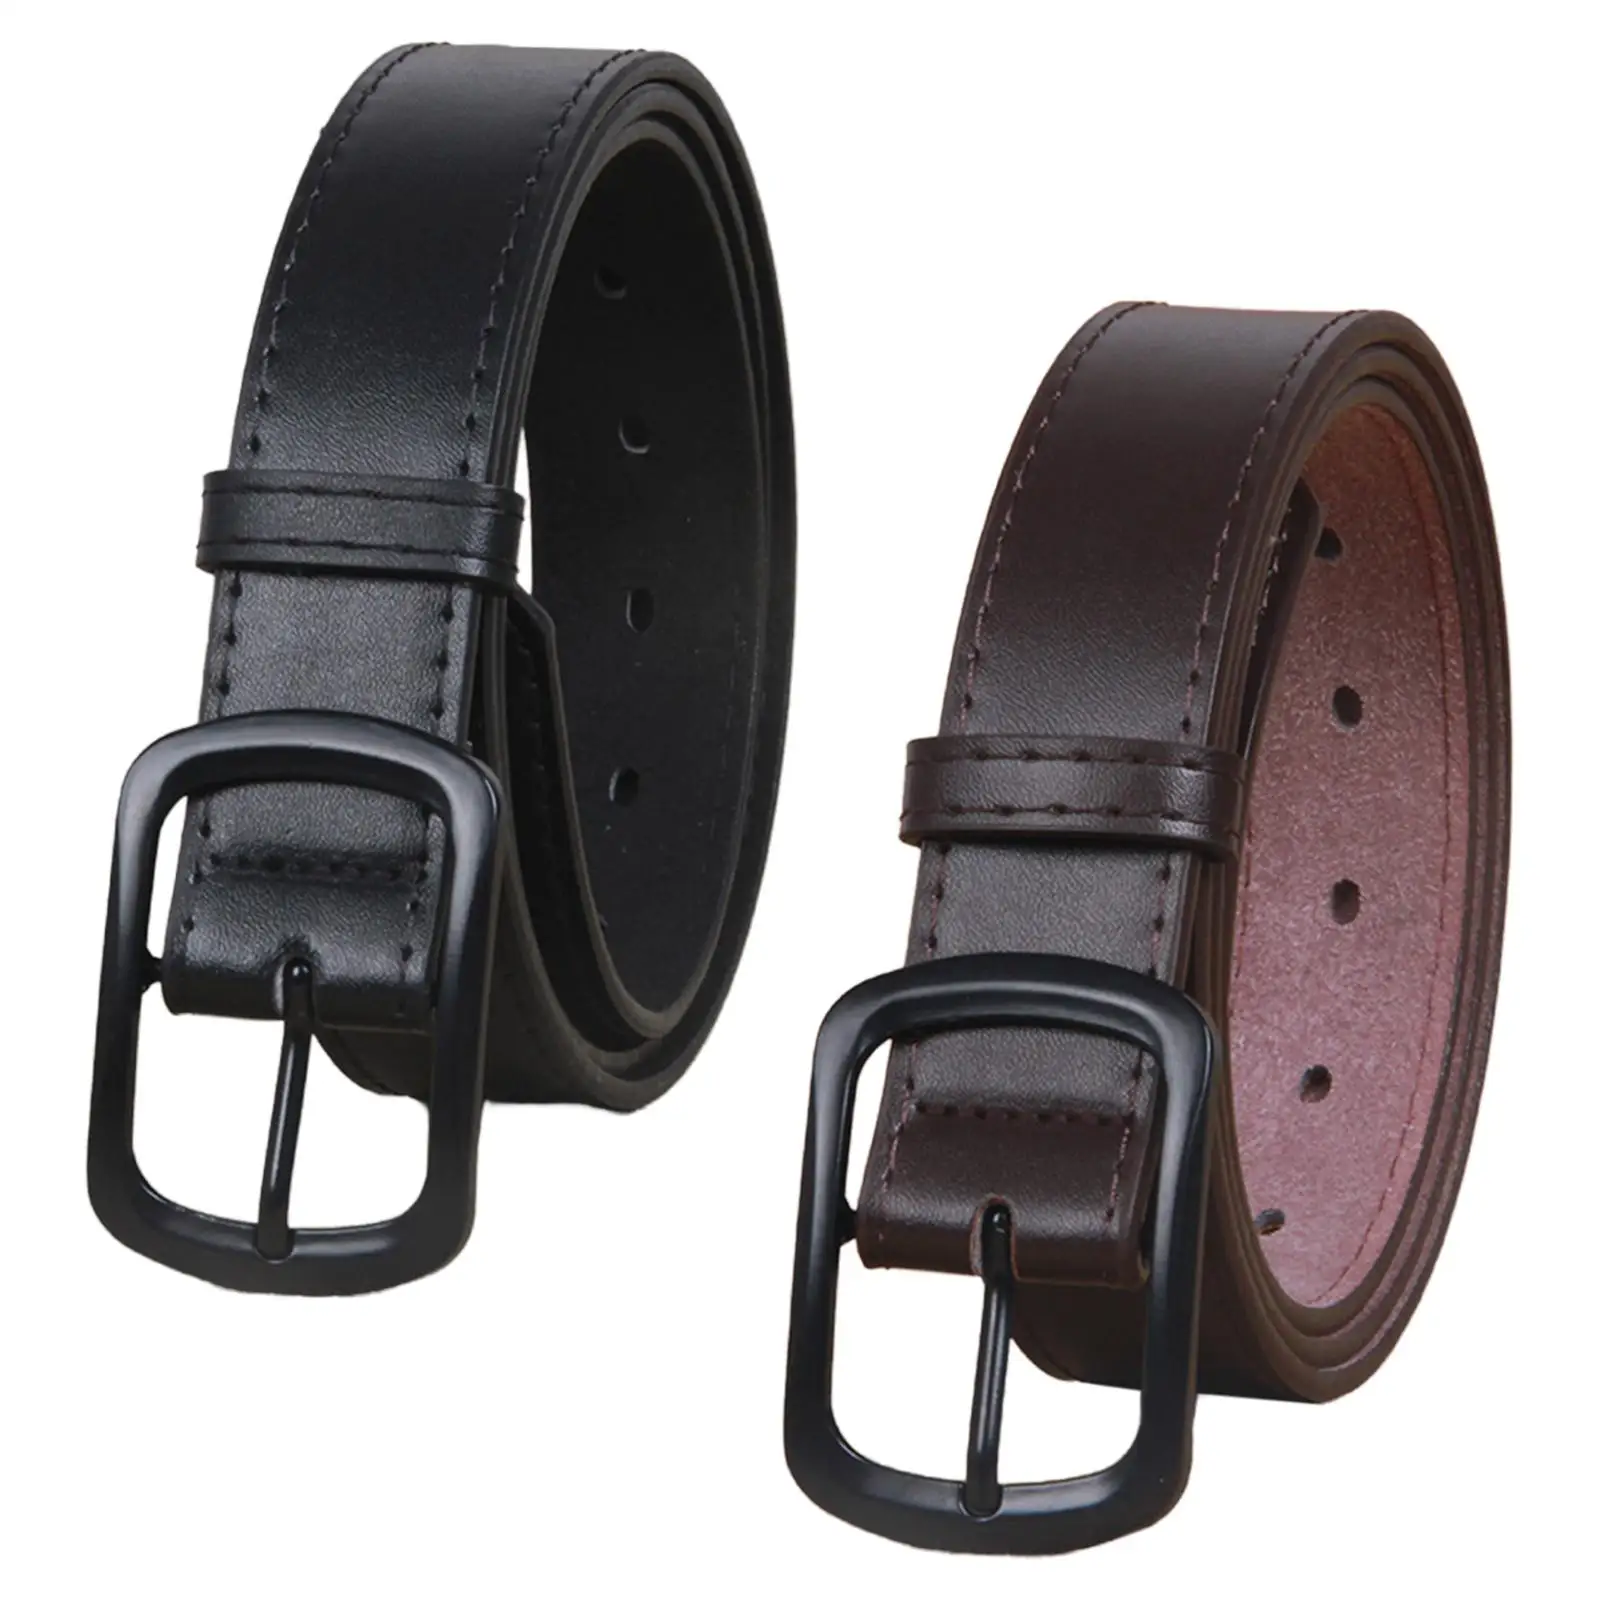 Men Dress Belt Adjustable Metal Pin Buckle PU Leather Belt Waist Strap for Business Jeans Accessories Outdoor Trousers Travel